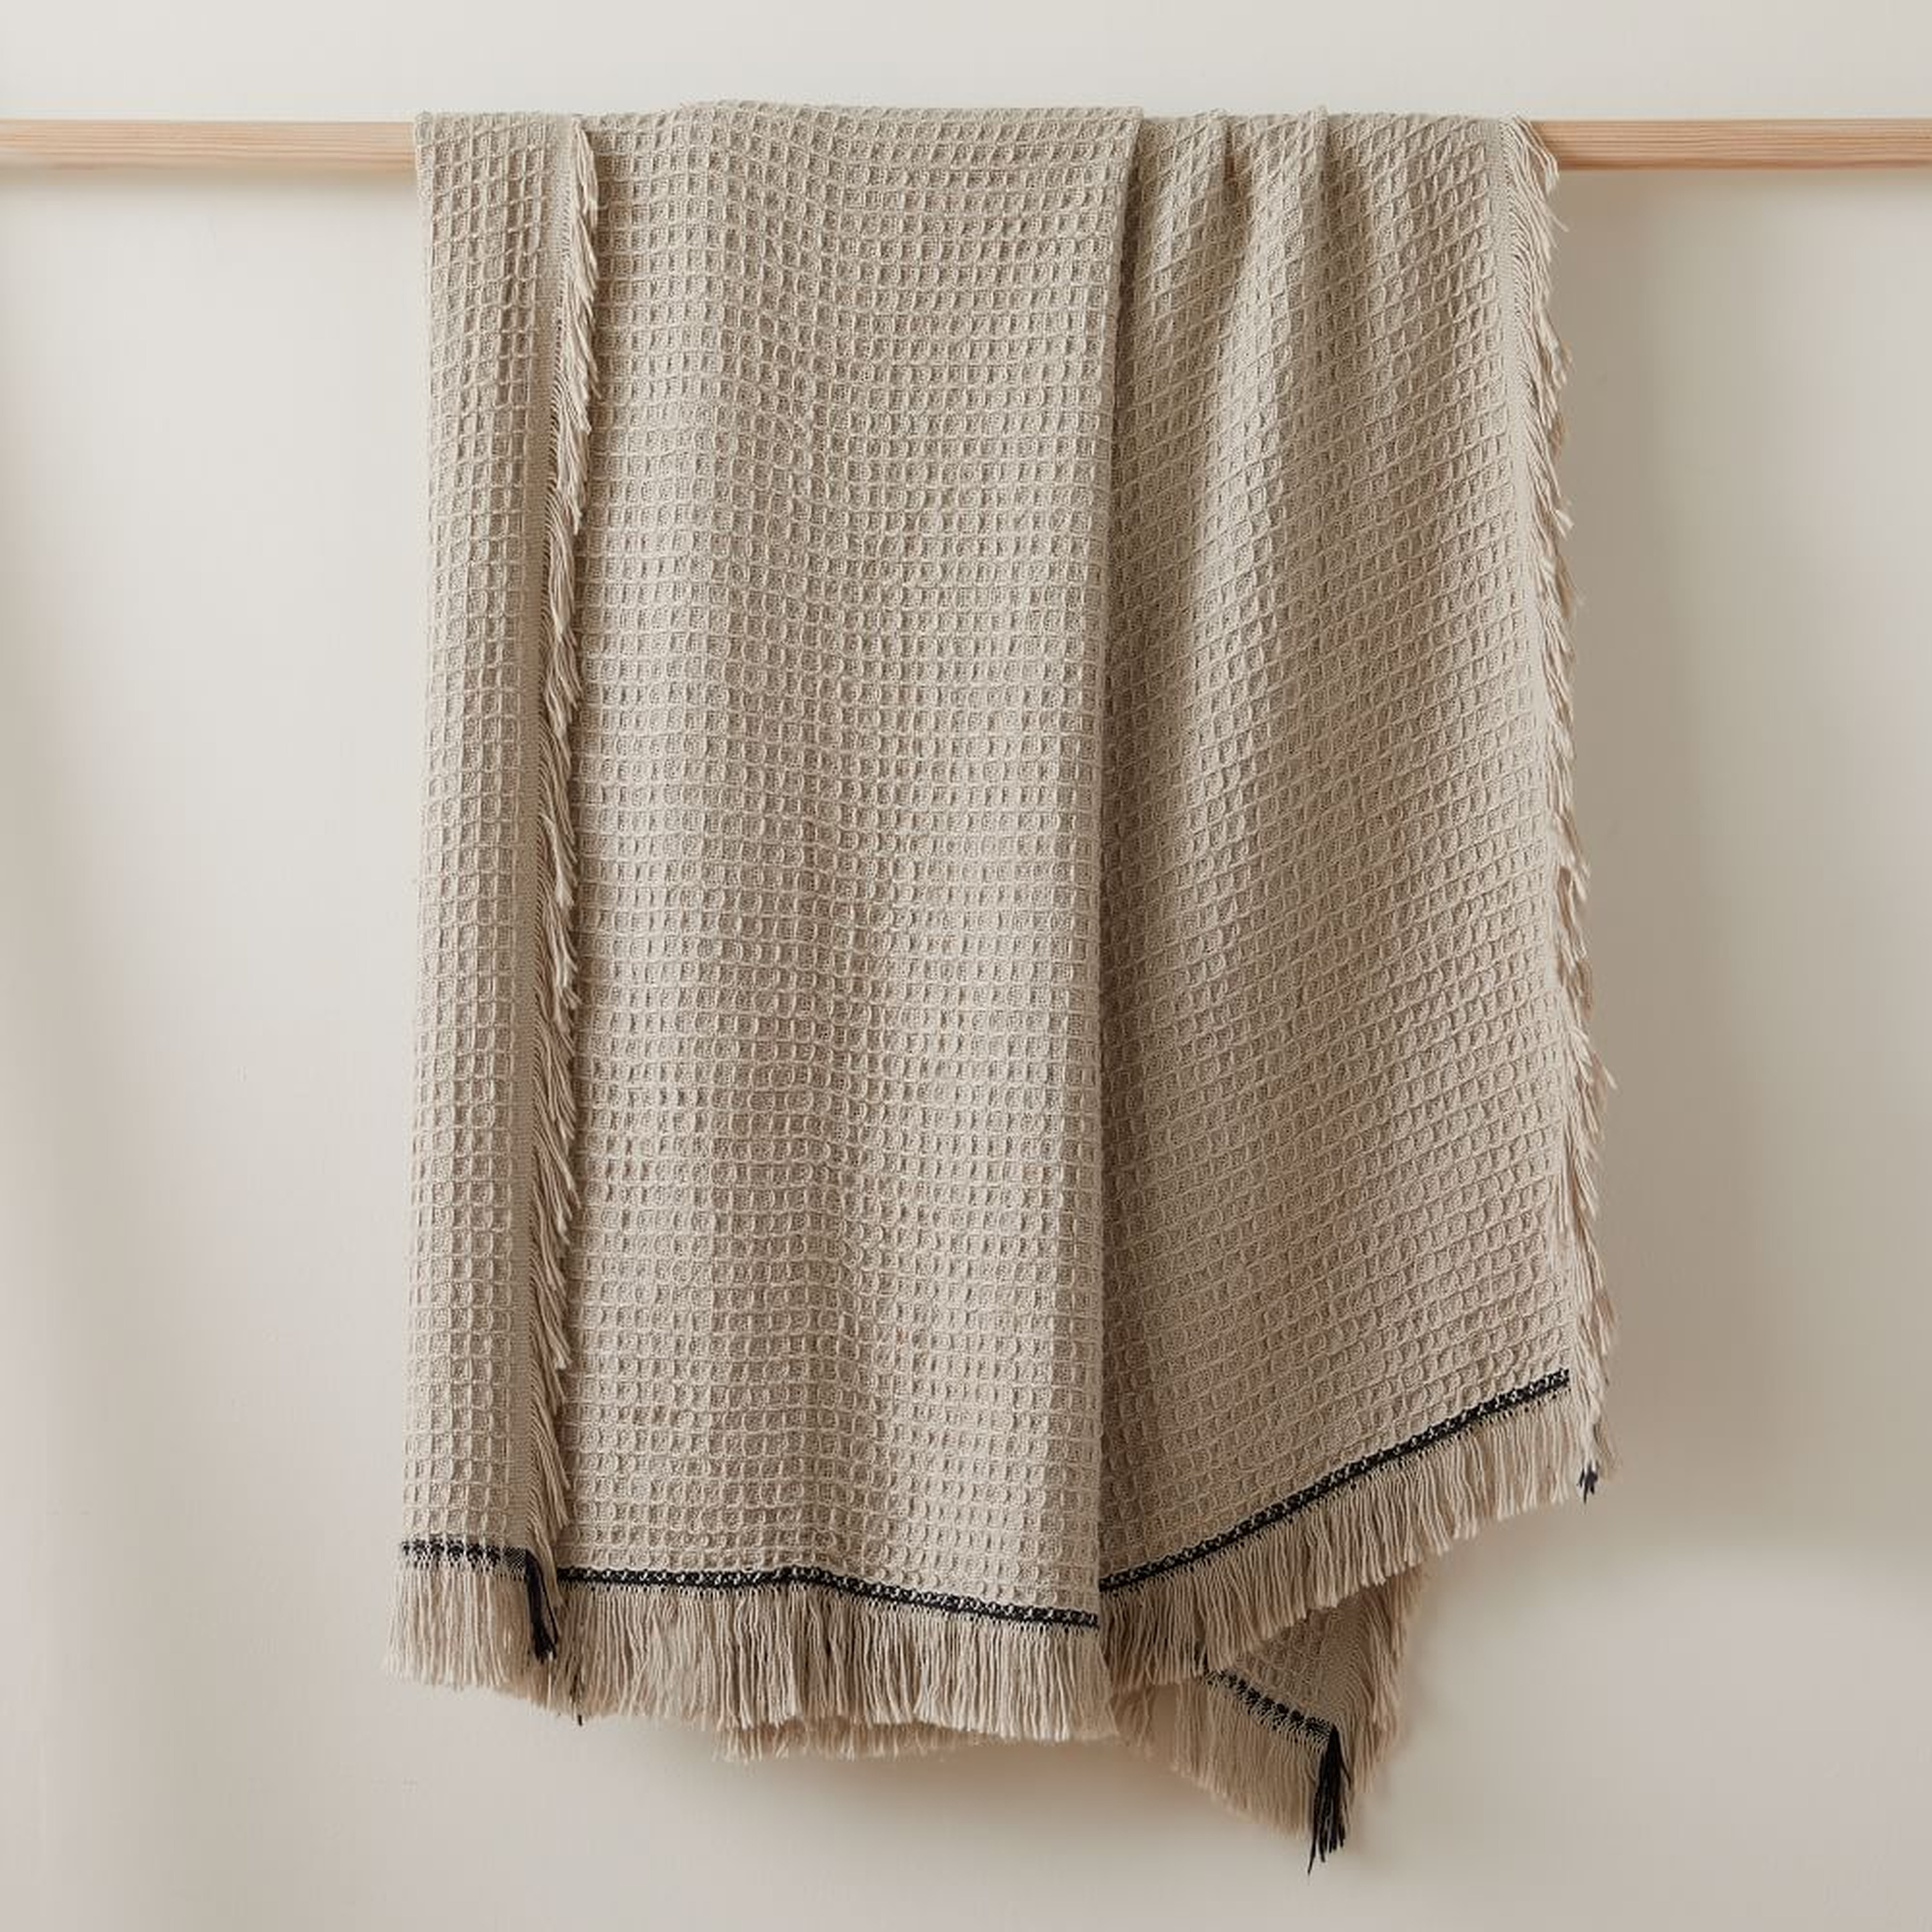 Cotton Waffle Throw, 50"x60", Pearl Gray - West Elm